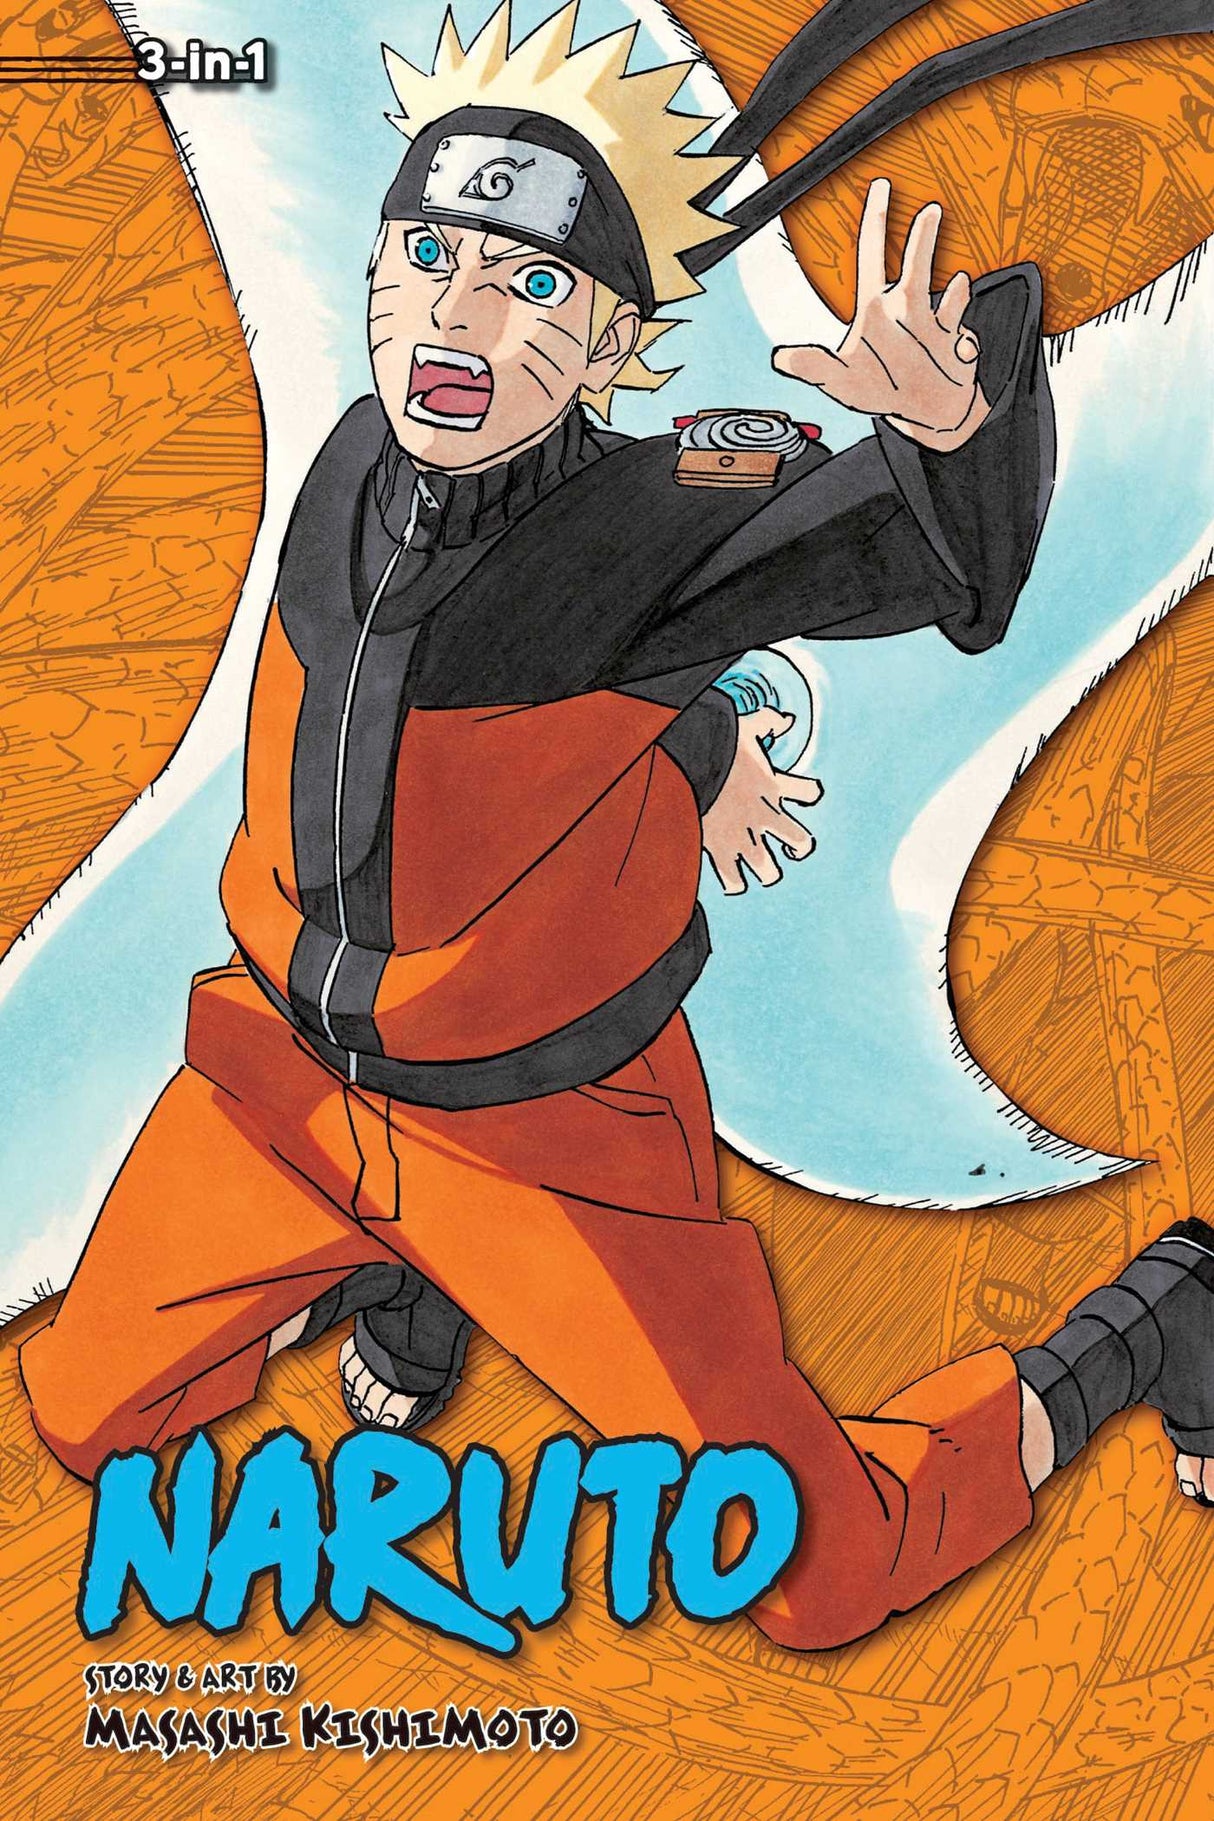 Cover image of the Manga Naruto (3-in-1 Edition), Vol. 19: Includes Vols. 55, 56 & 57